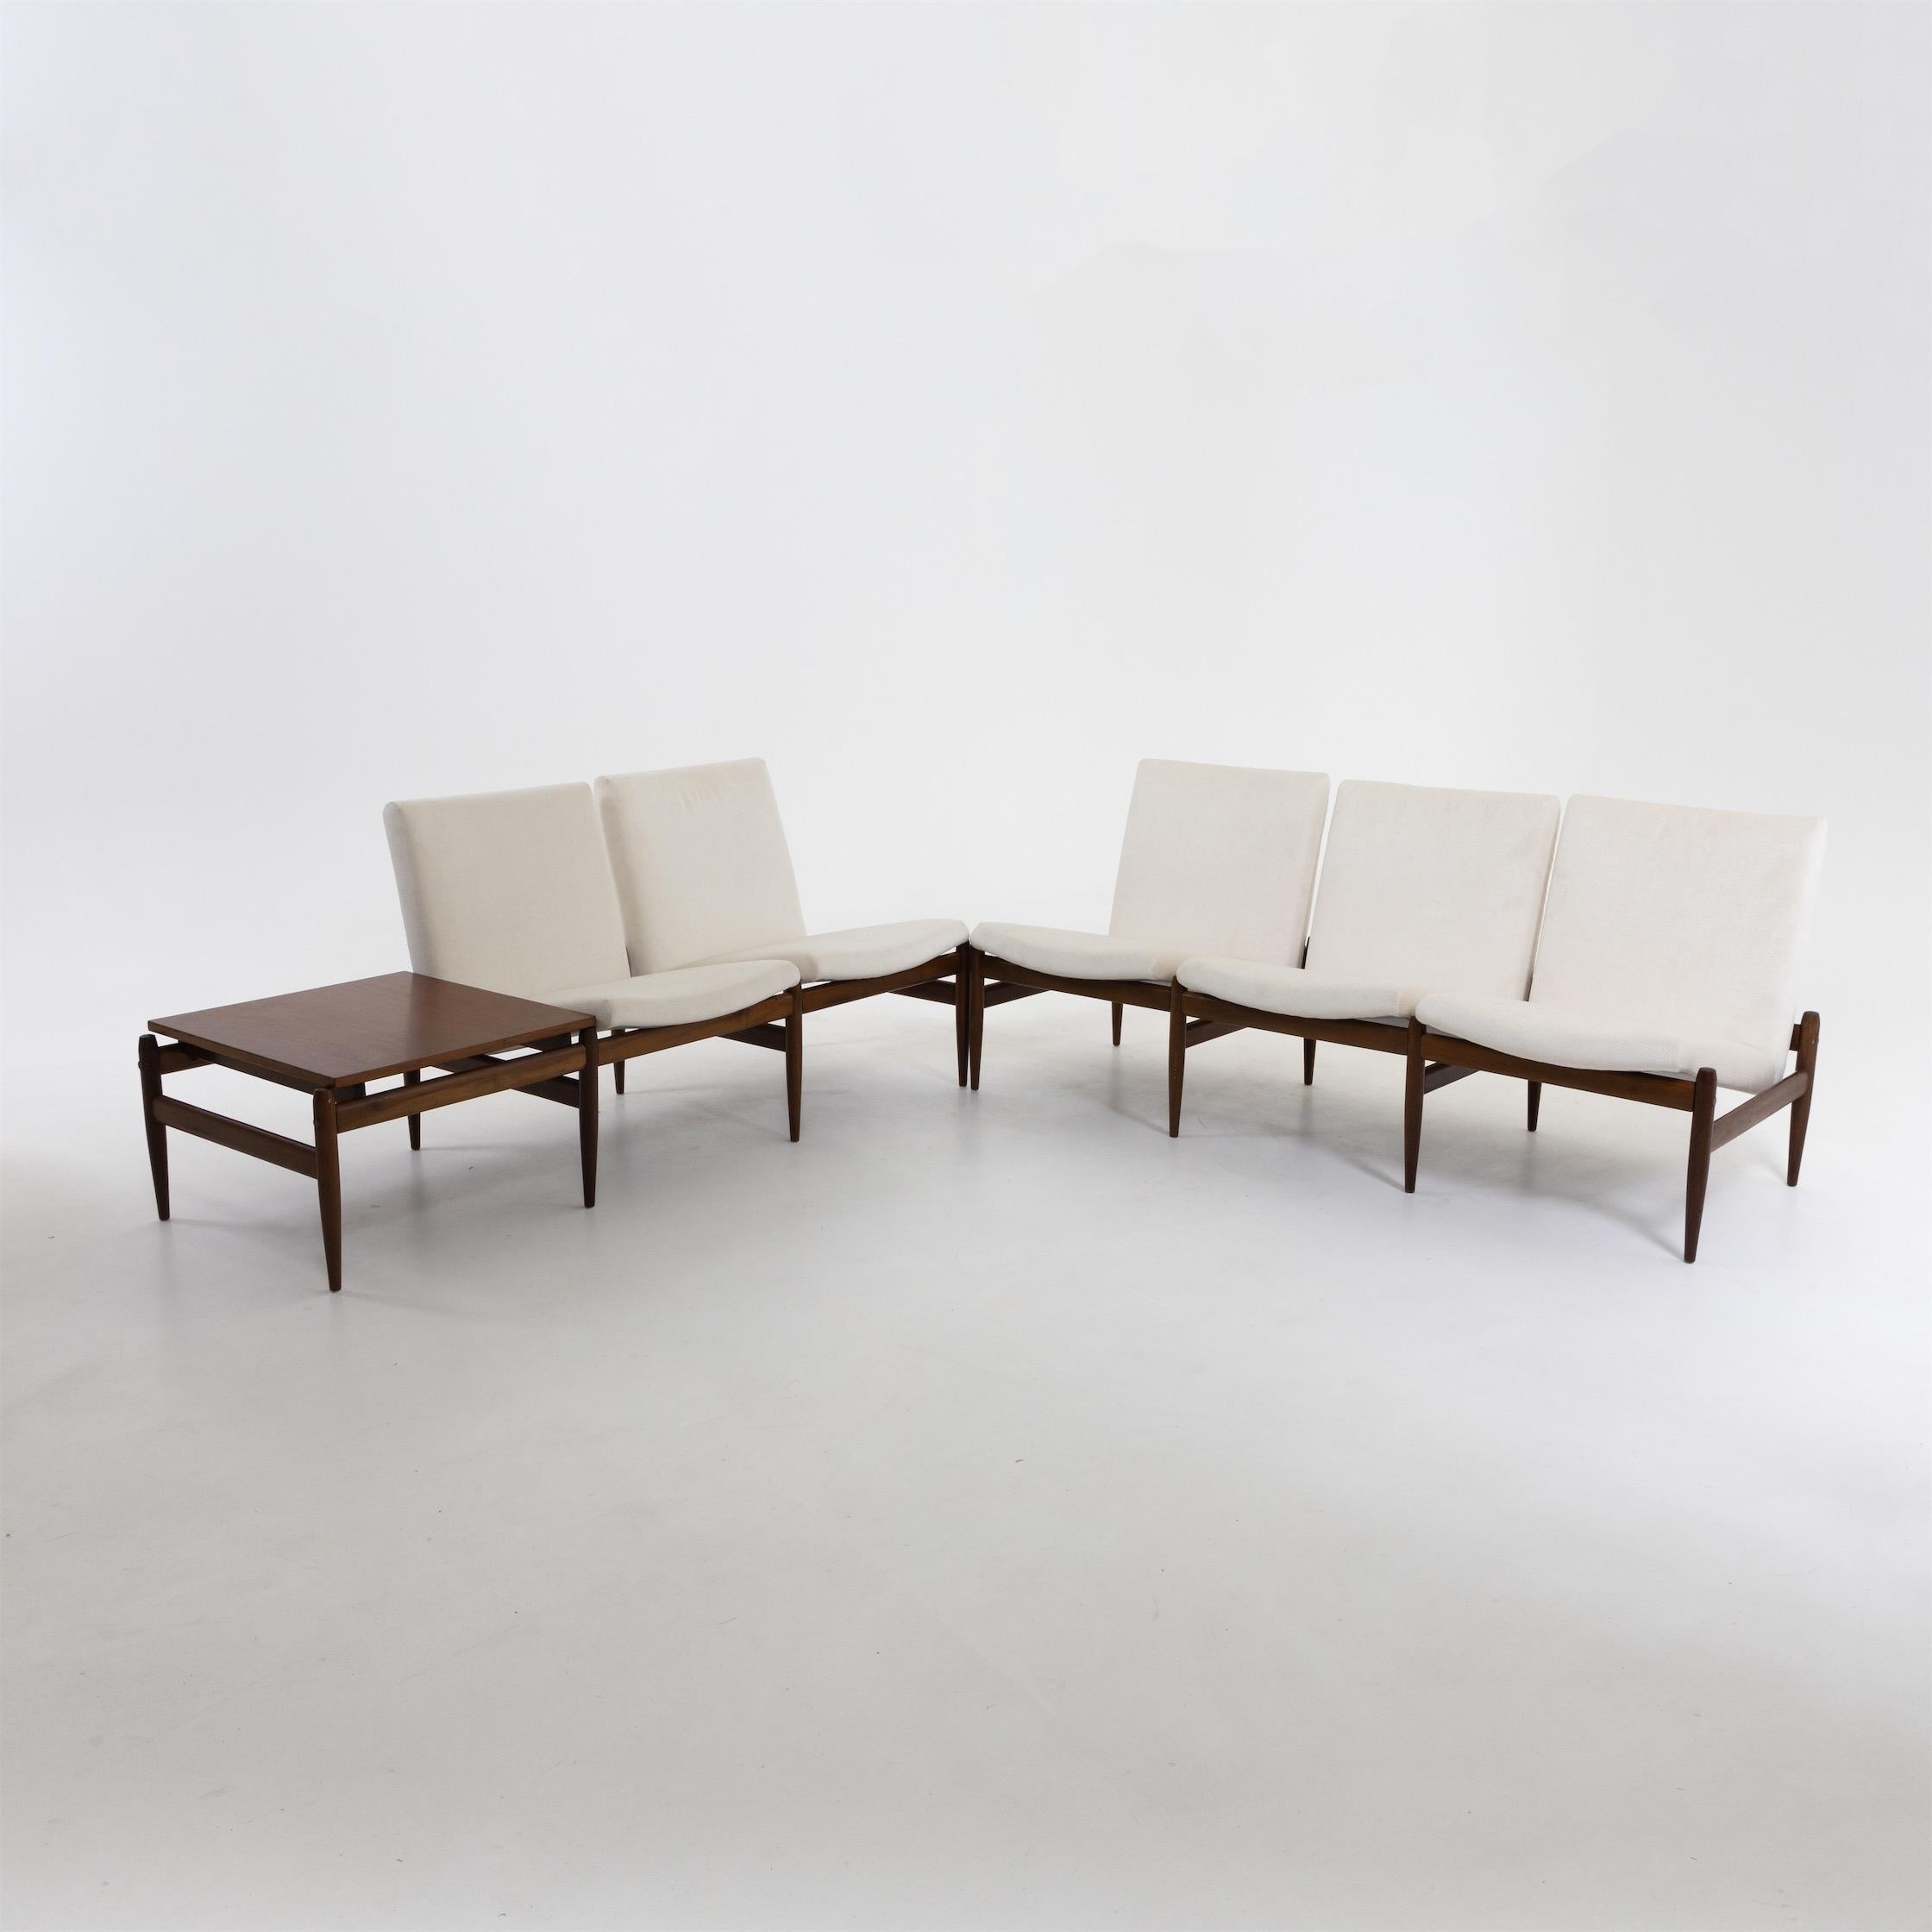 Two-piece sofa with five seats and a tabletop by Liceu De Artes E Oficios. The order of the seats can be adjusted.